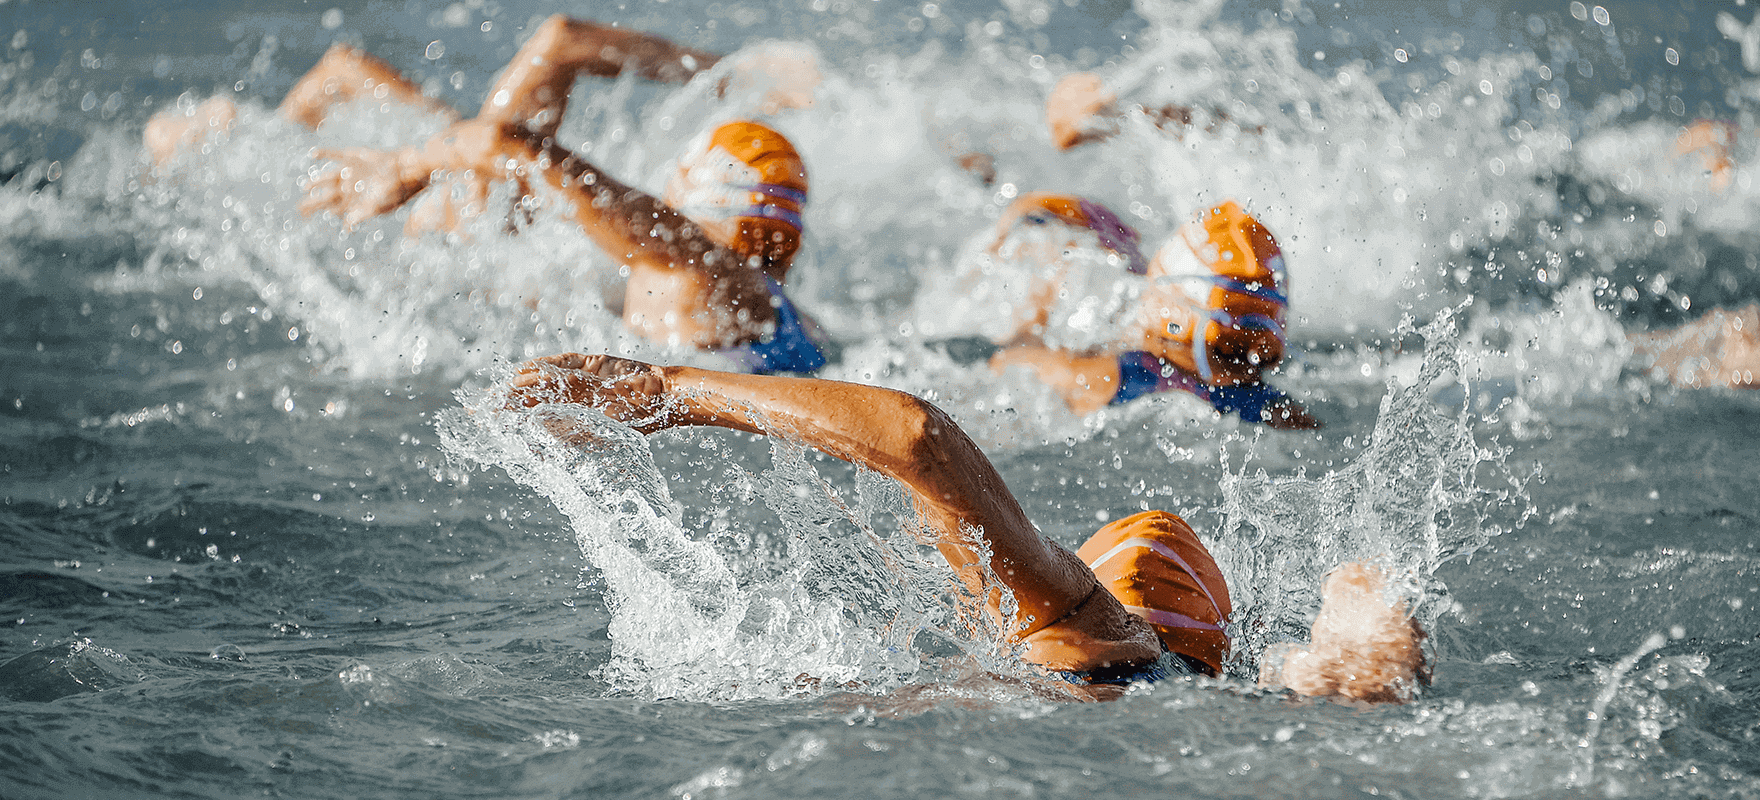 triathlon athletes racing in the water